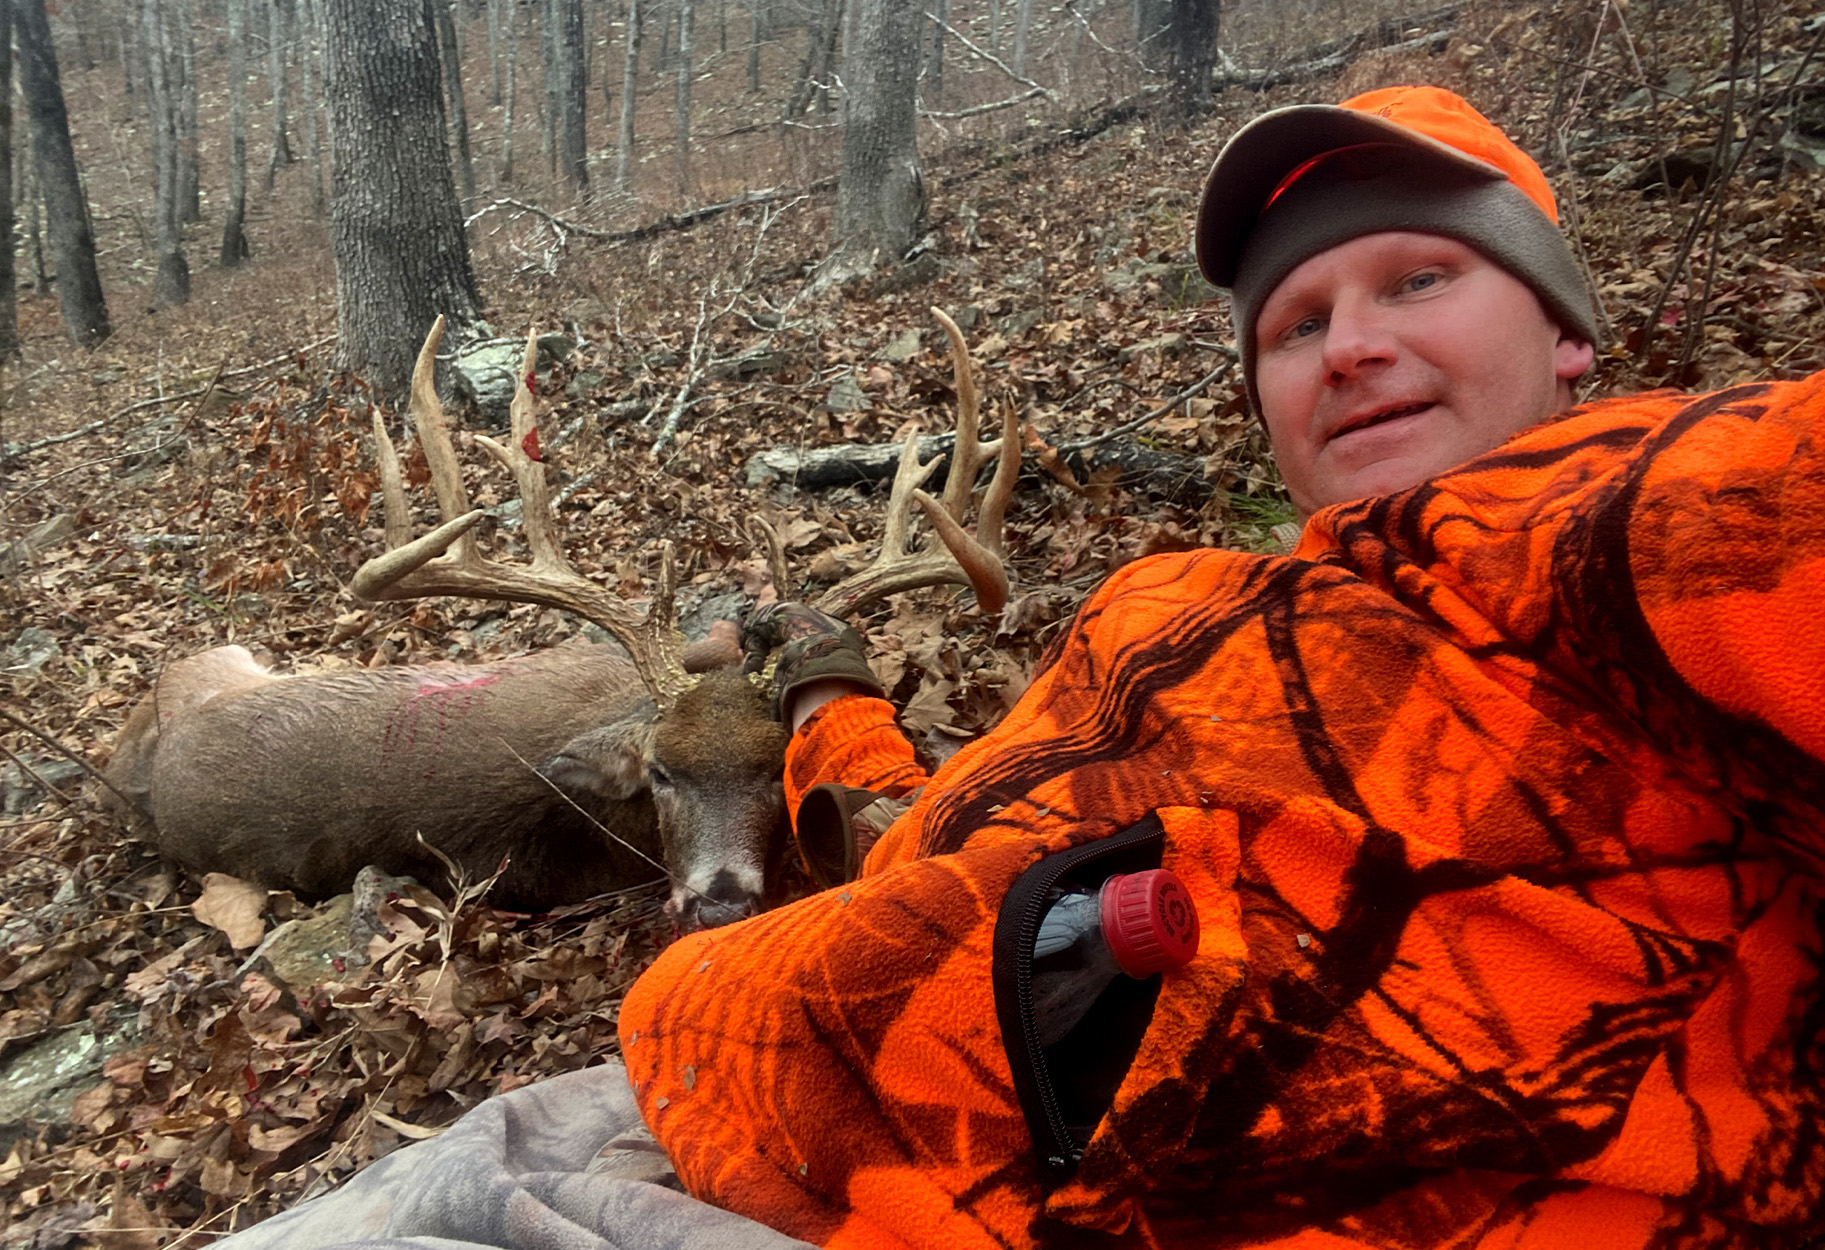 An Arkansas deer hunter takes a selfie with the biggest buck he's ever killed.